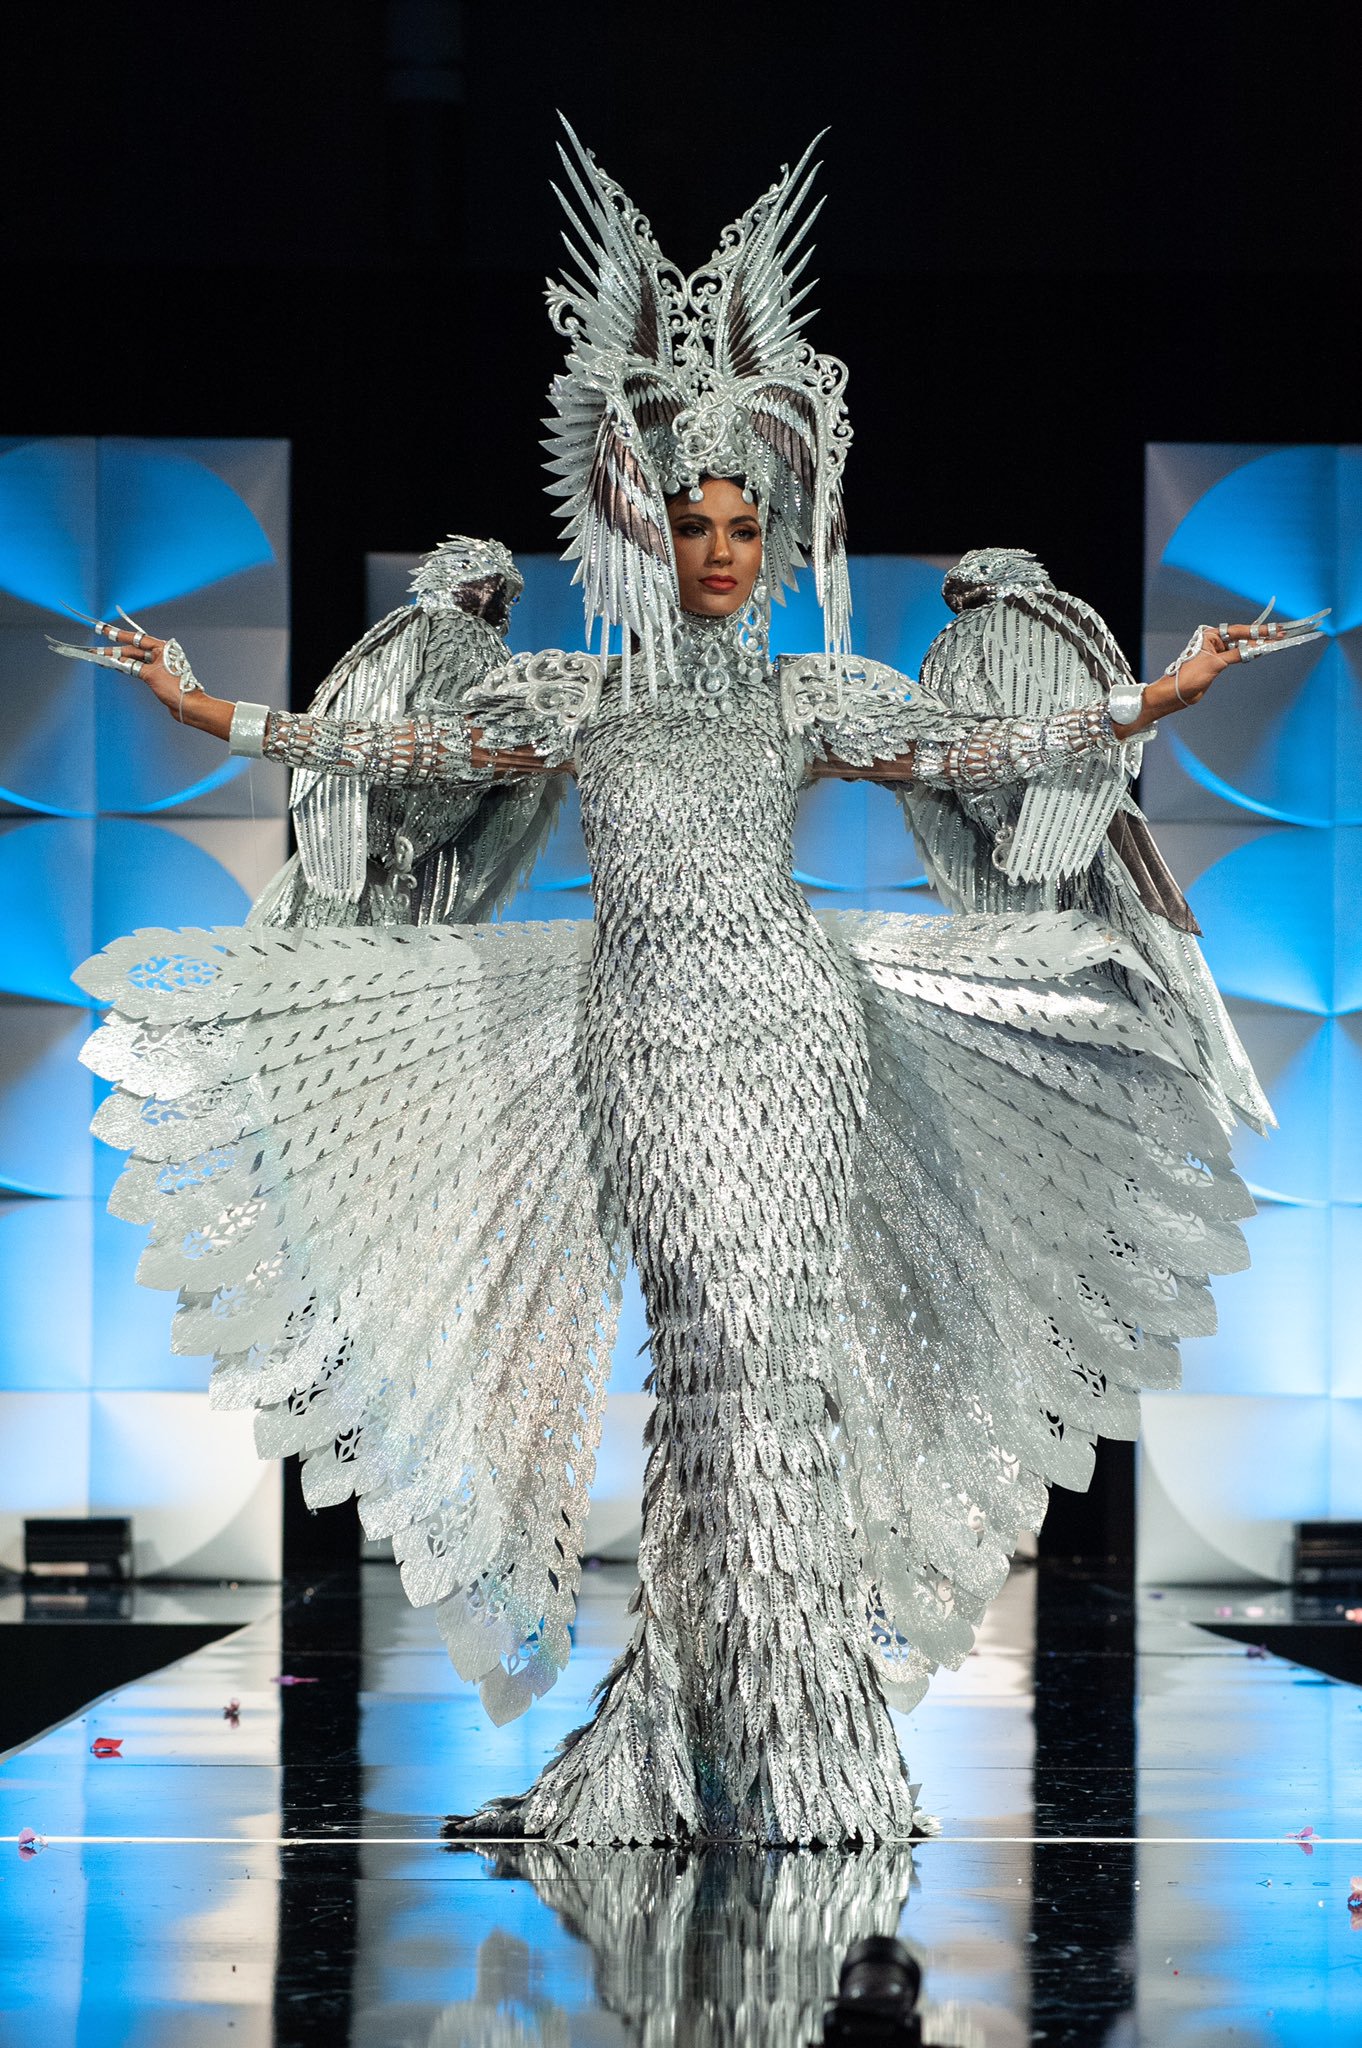 No, Miss Malaysia didn't win Miss Universe best national costume. Miss